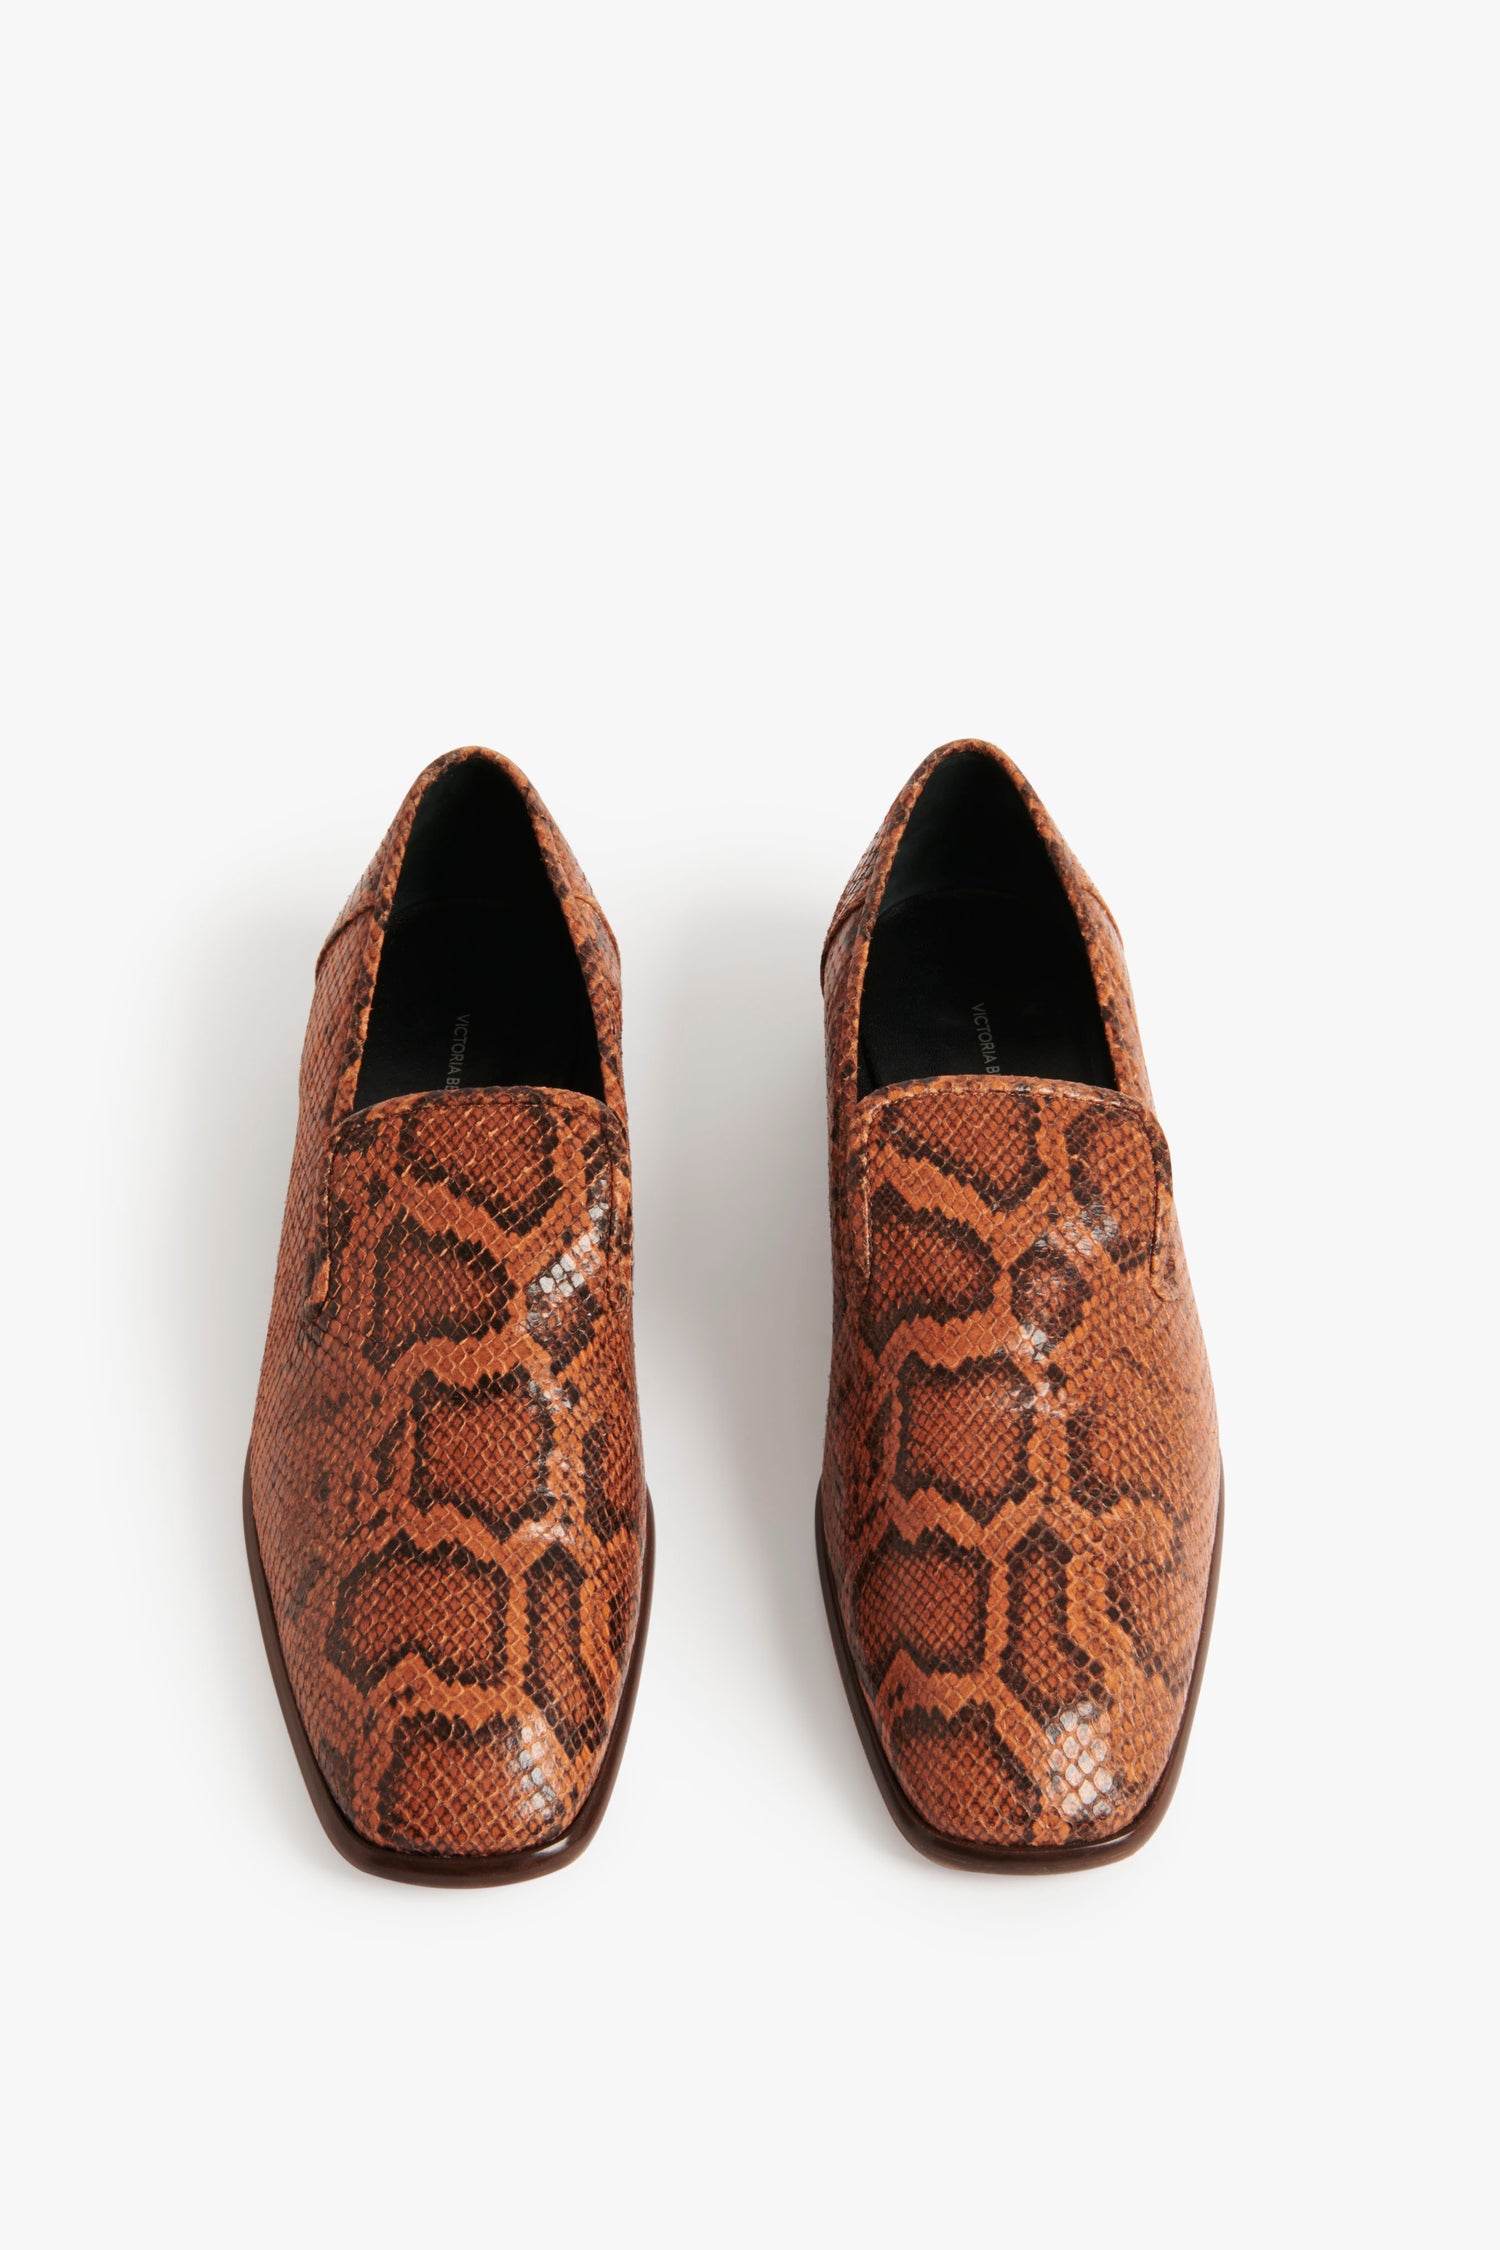 A pair of Hanna Loafer in Copper Snake Print by Victoria Beckham with a pointed toe and black interior lining, displayed on a white background. This traditional loafer design is perfect for the Spring Summer 2022 collection.